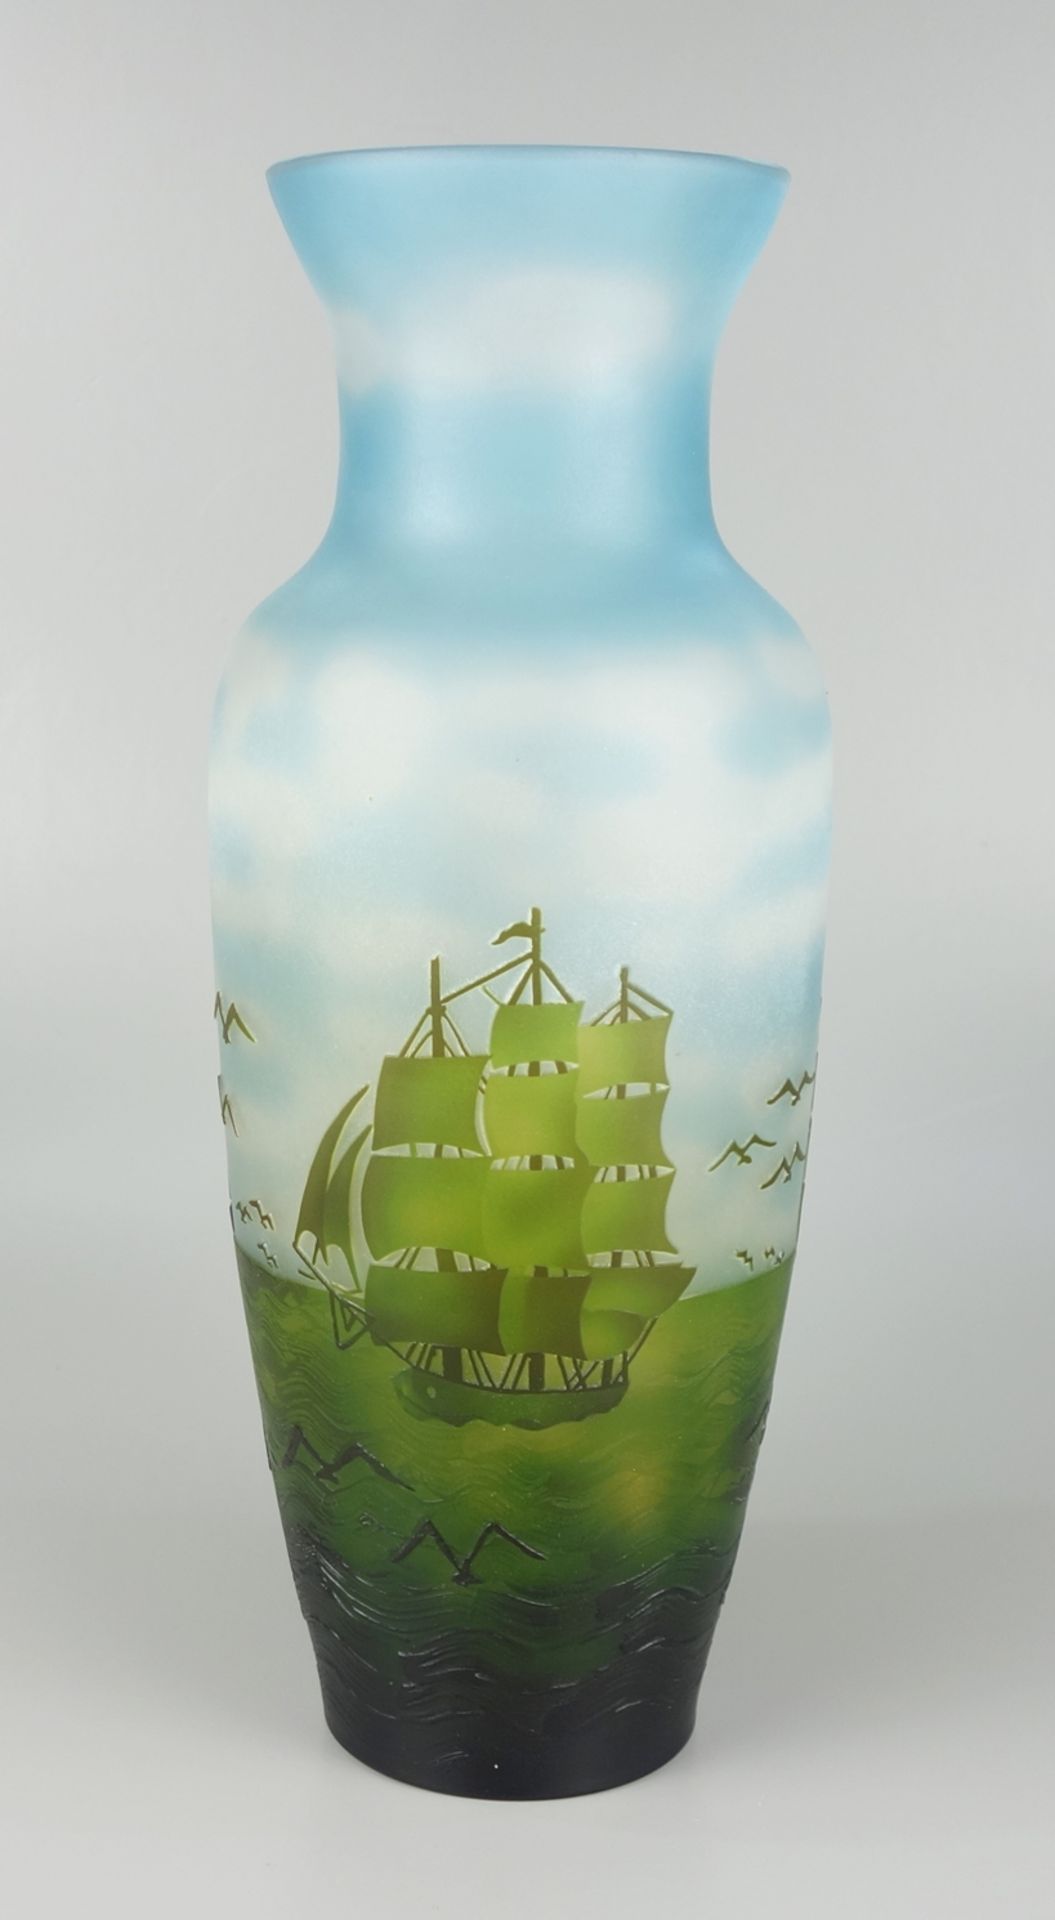 large vase, cameo glass with maritime scene, 20th c. - Image 2 of 4